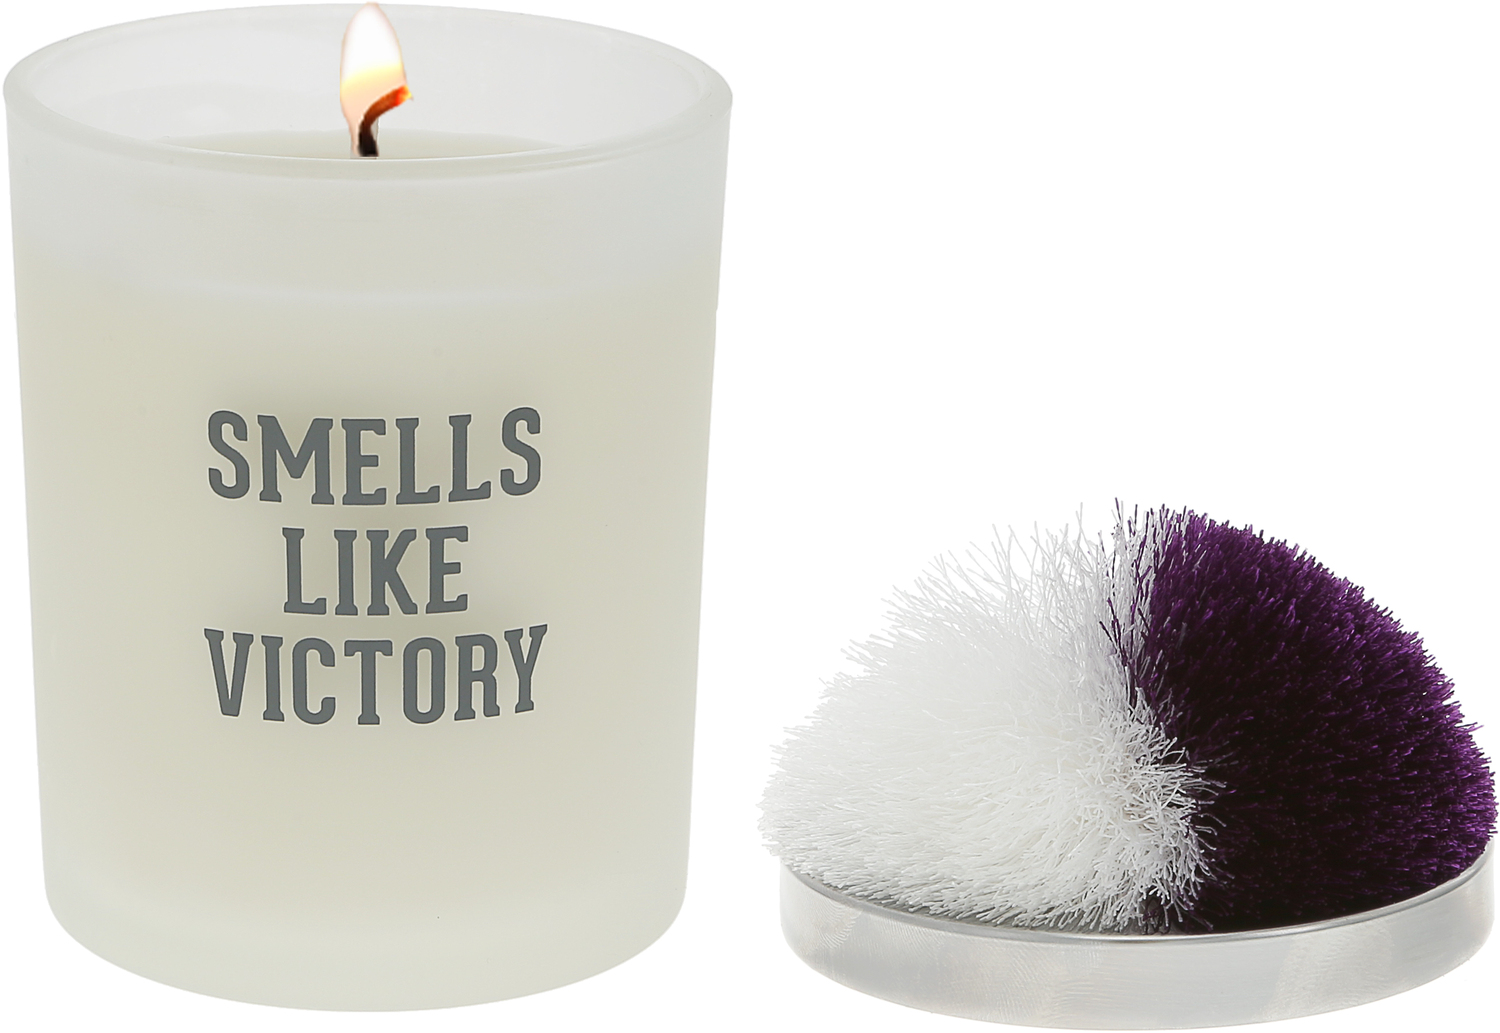 Victory - Purple & White by Repre-Scent - Victory - Purple & White - 5.5 oz - 100% Soy Wax Candle with Pom Pom Lid
Scent: Tranquility